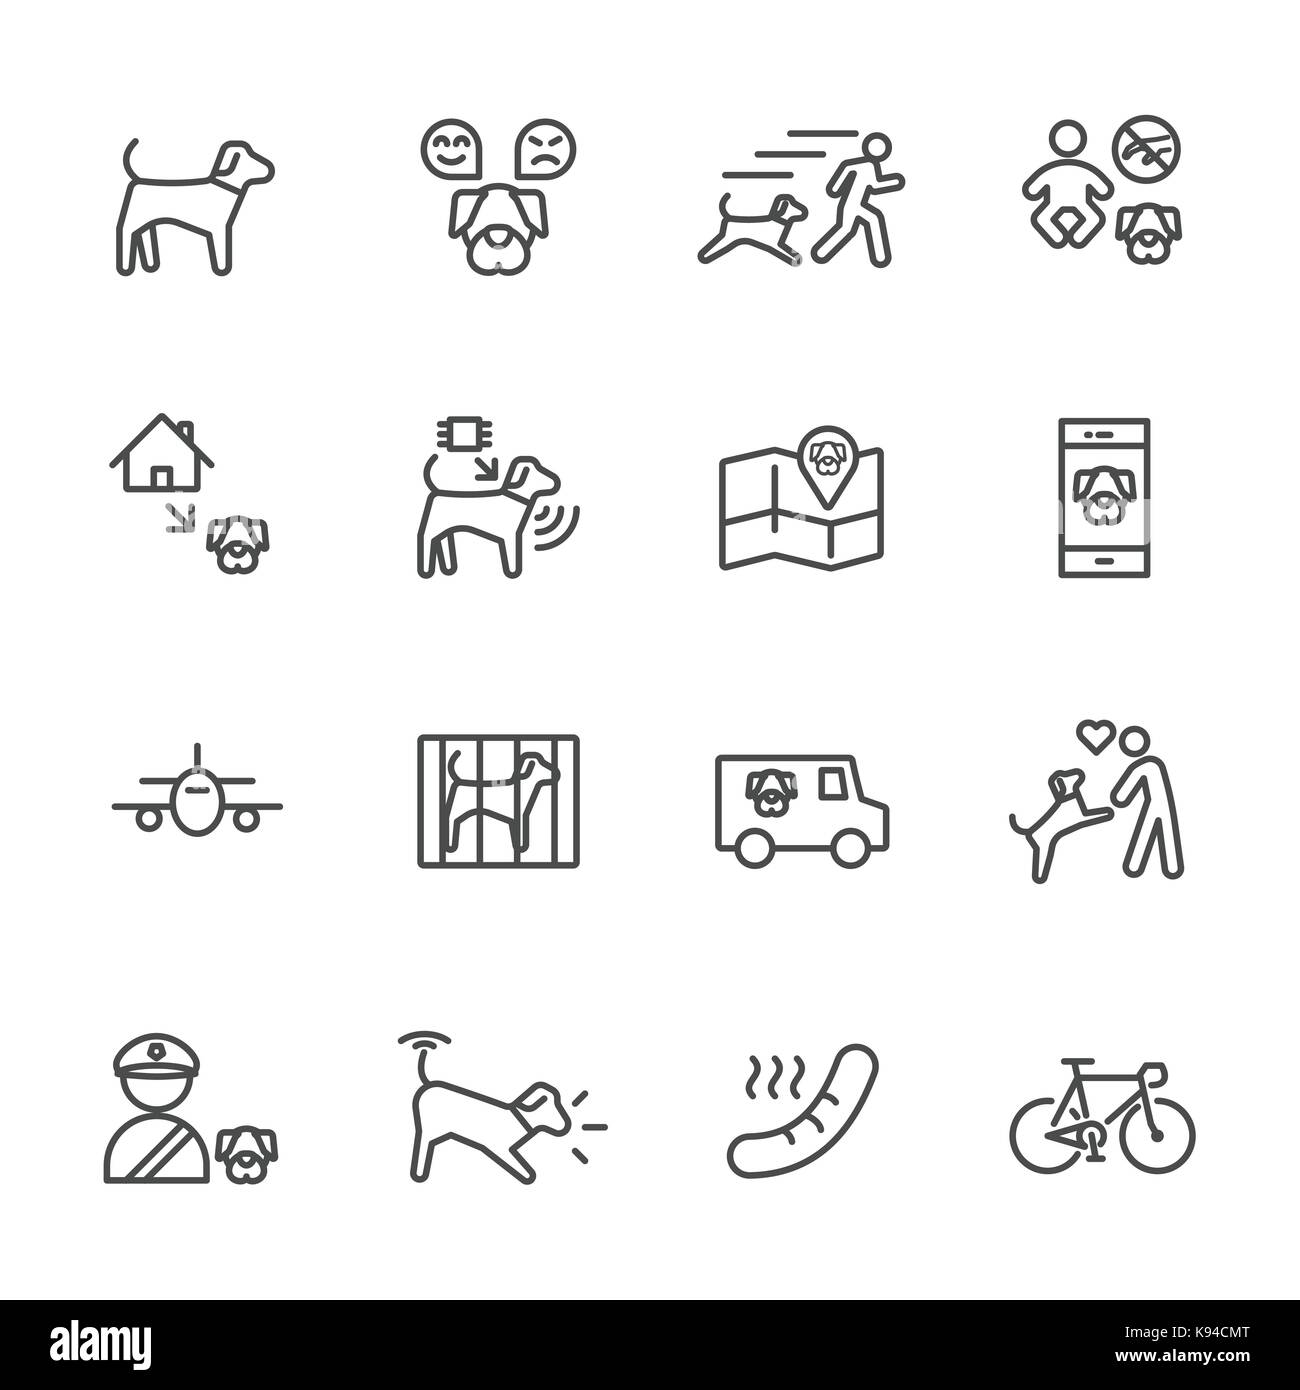 Dog is my best friend, Simple thin line icons set. Vector icon design Stock Vector